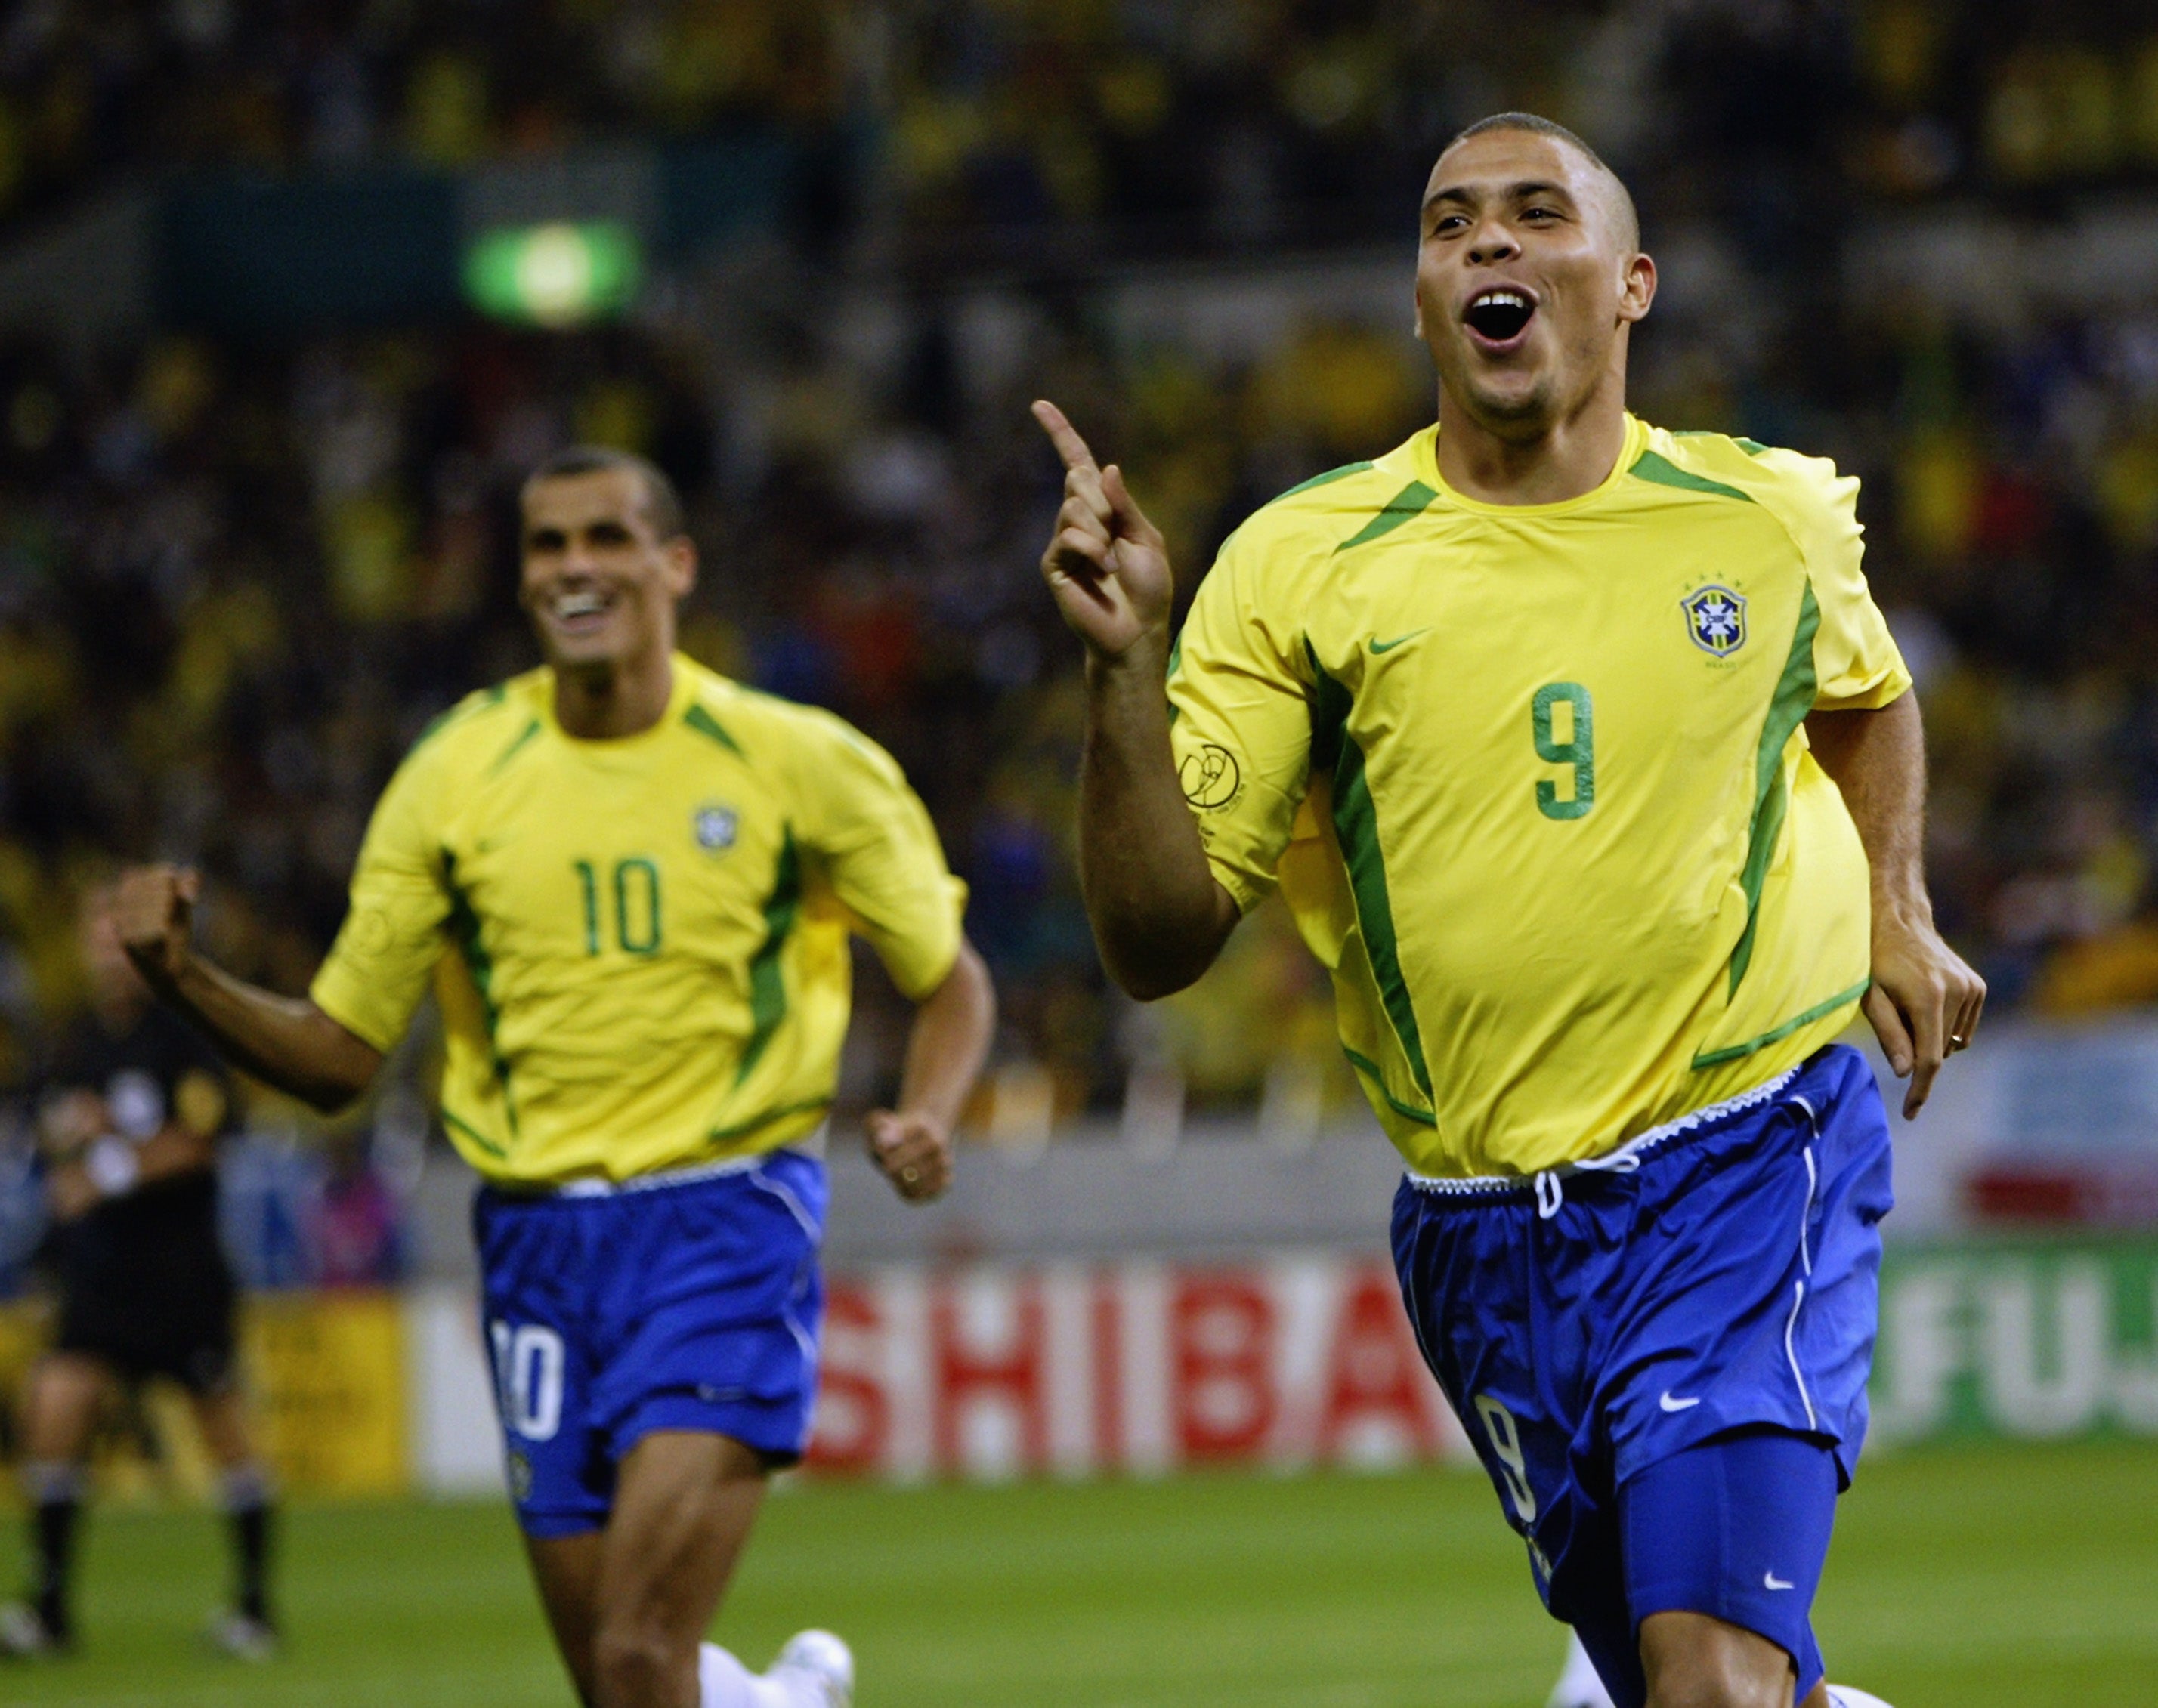 Ronaldo and Rivaldo were at the heart of Brazil’s World Cup glory